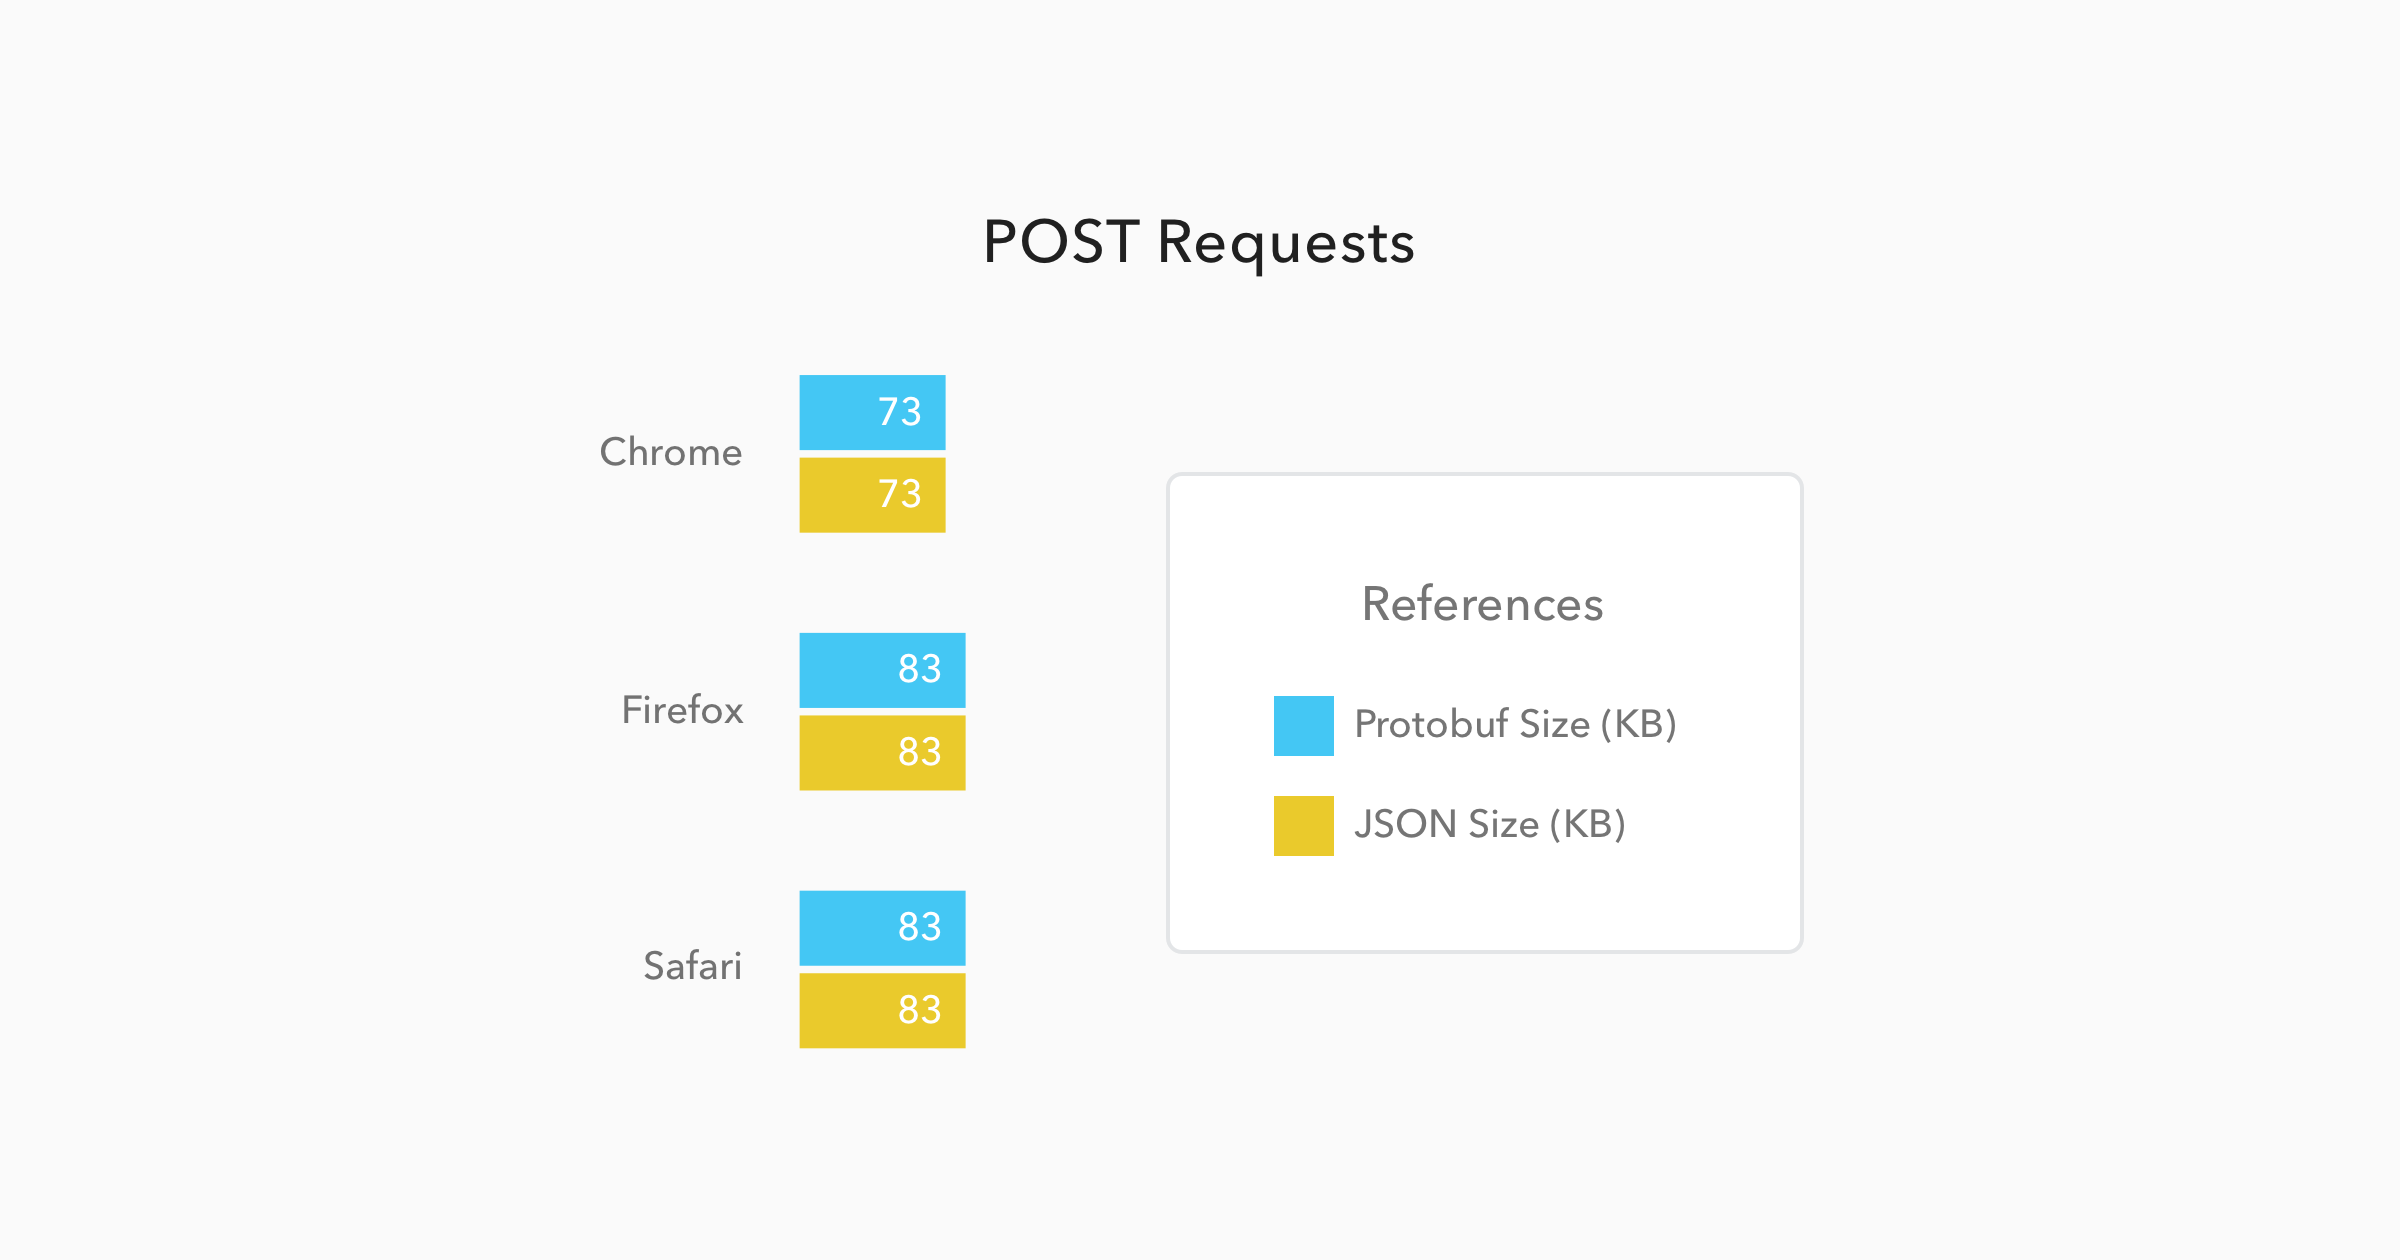 Comparison of Protobuf/JSON payload sizes on POST requests